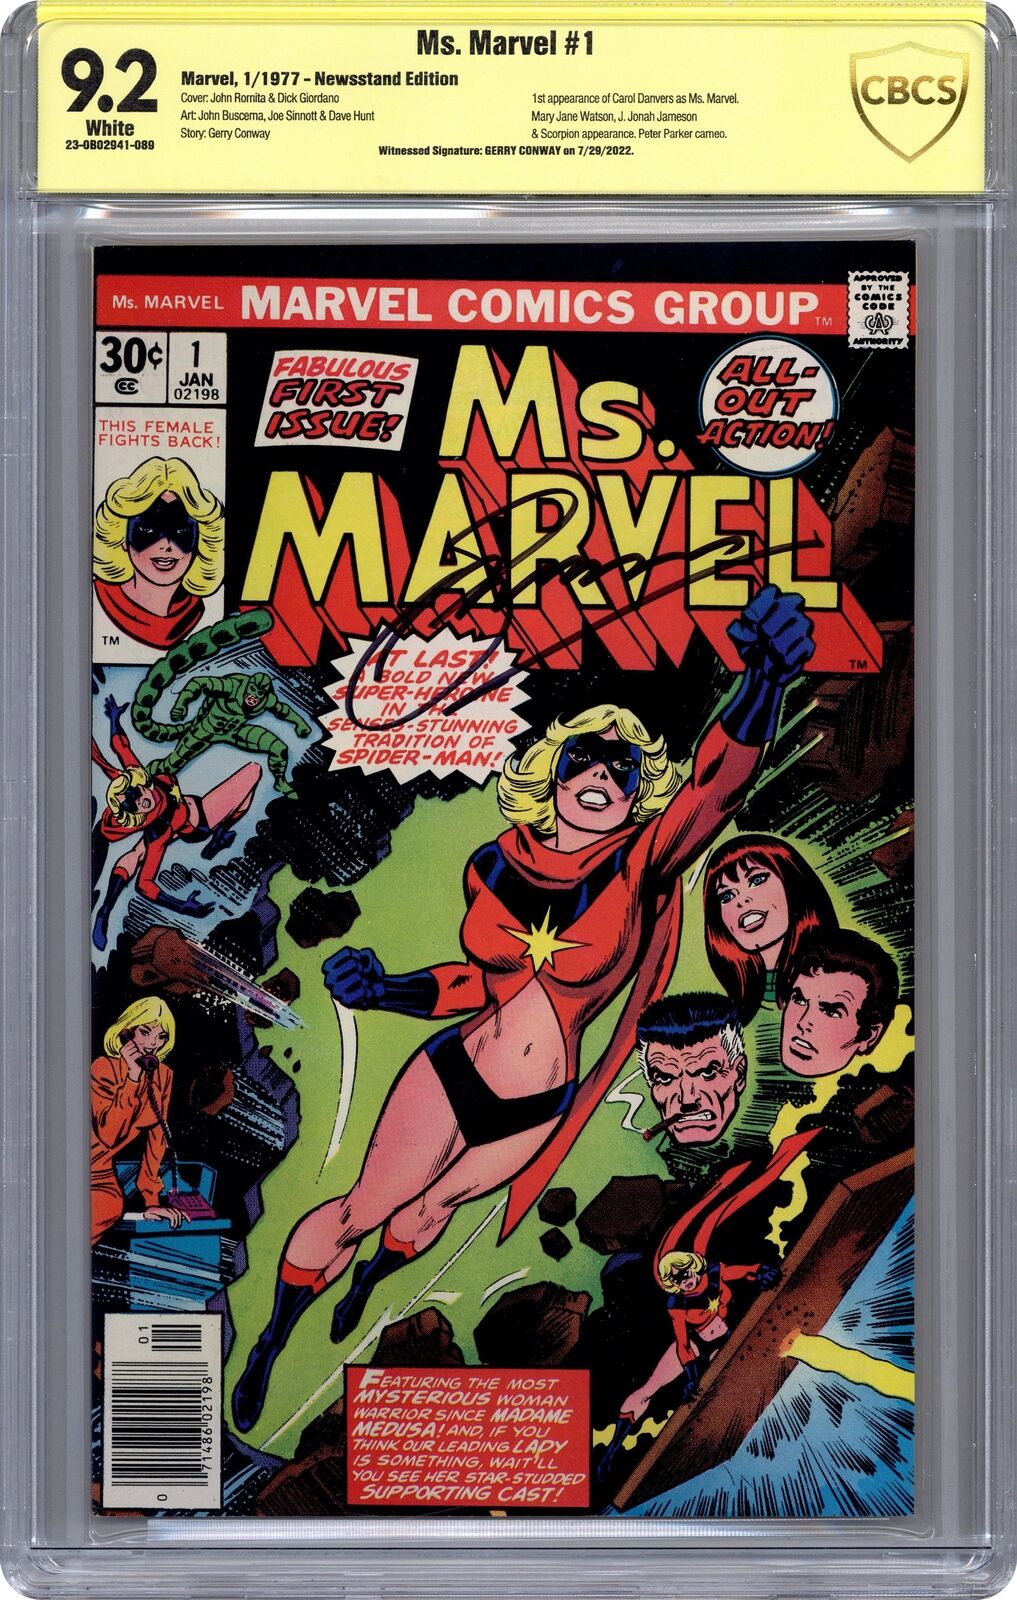 Ms. Marvel #1 CBCS 9.2 Newsstand SS Gerry Conway 1977 23-0B02941-089